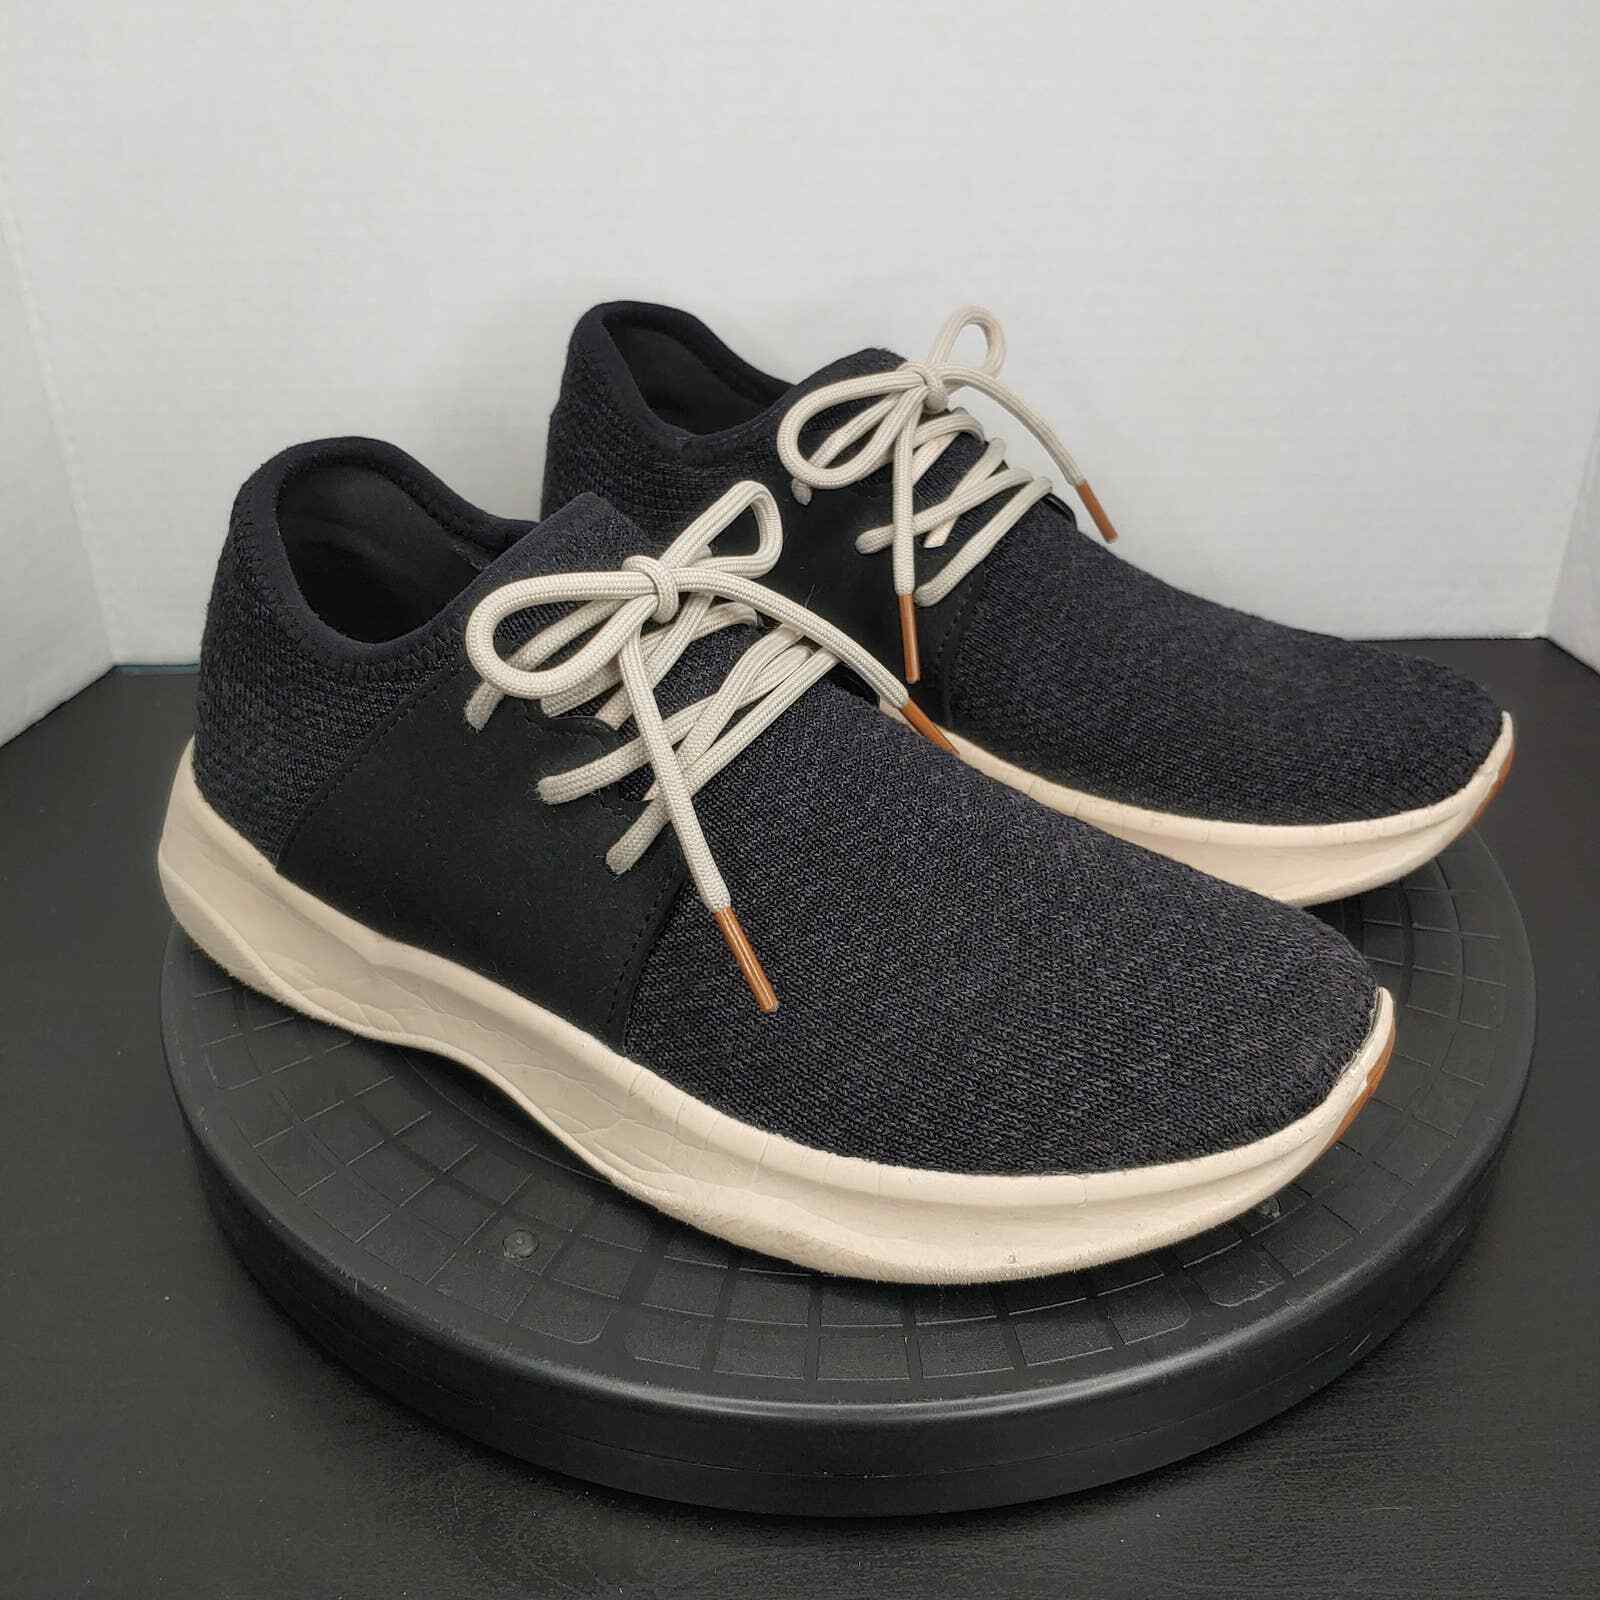 Vessi Everyday Sneakers Limited Edition Midnight Black Waterproof Shoes Sz 8